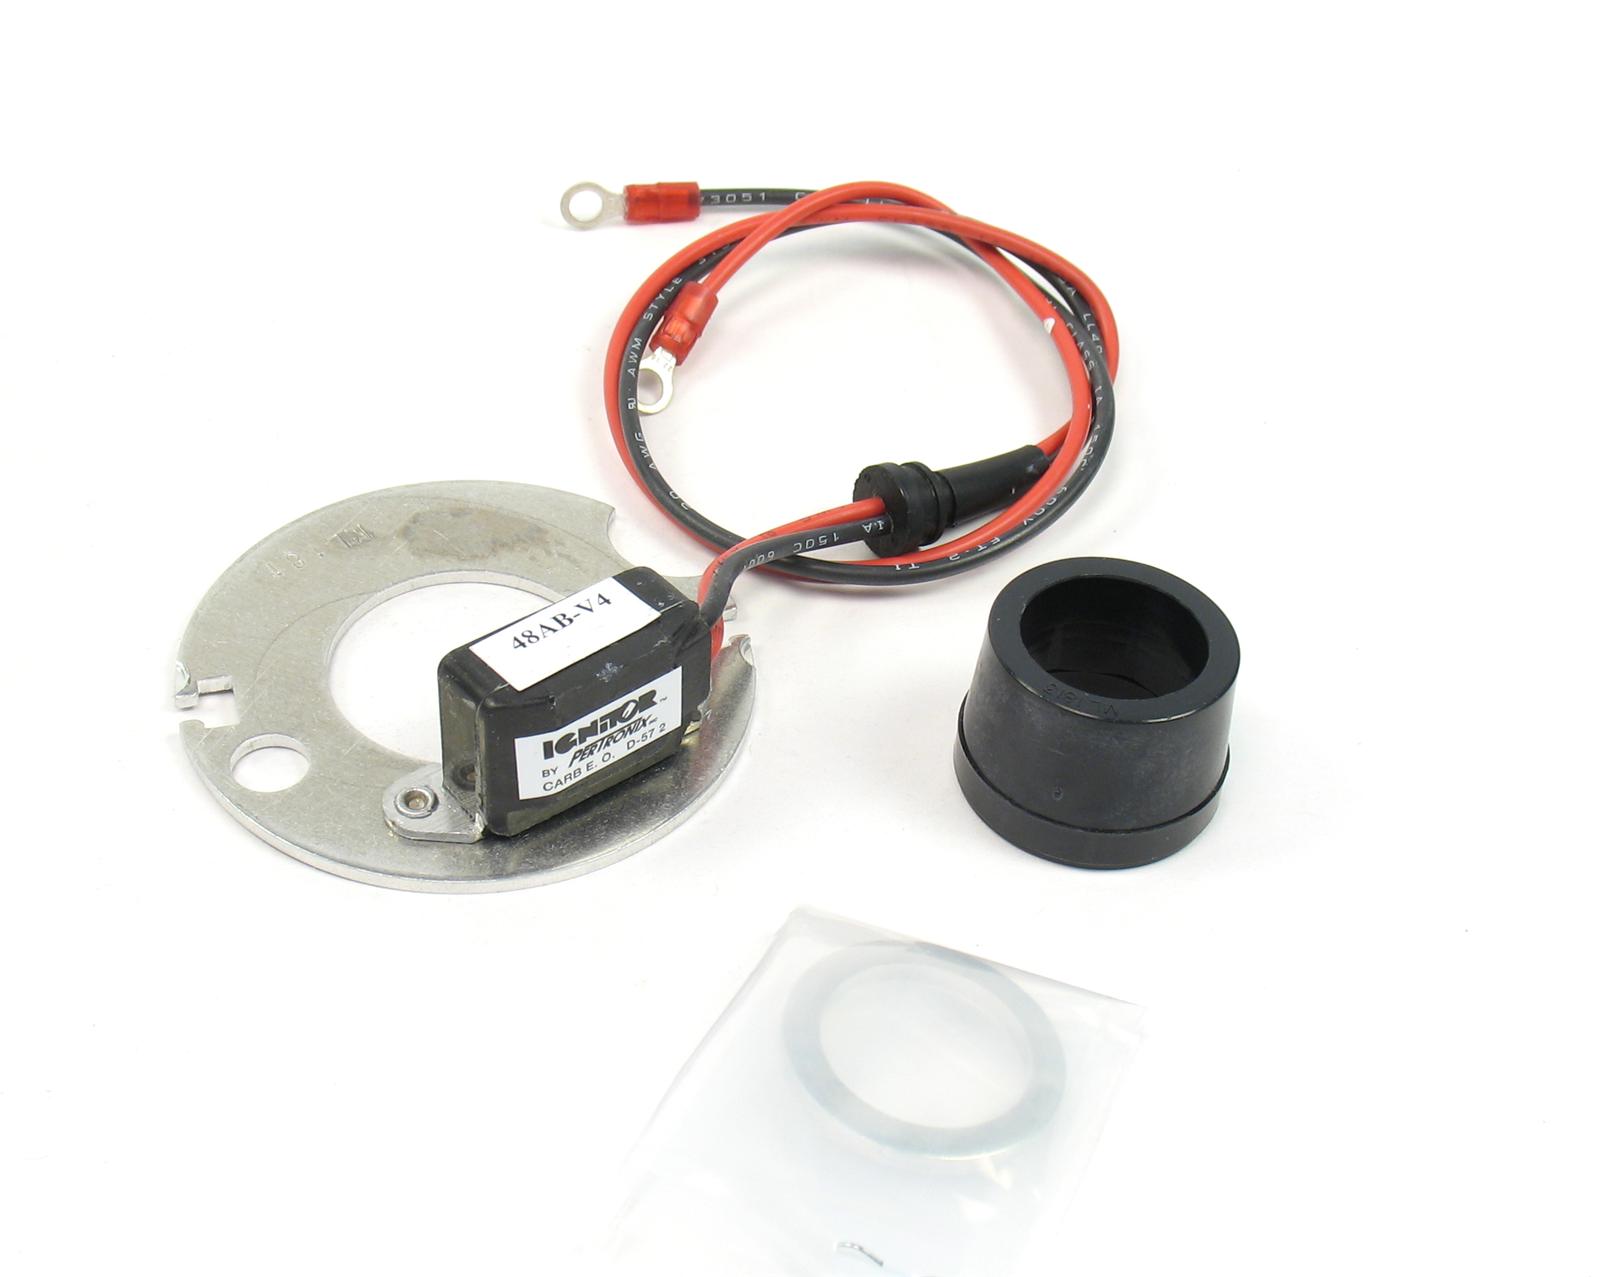 PERTRONIX IGNITOR SOLID STATE IGNITION SYSTEM